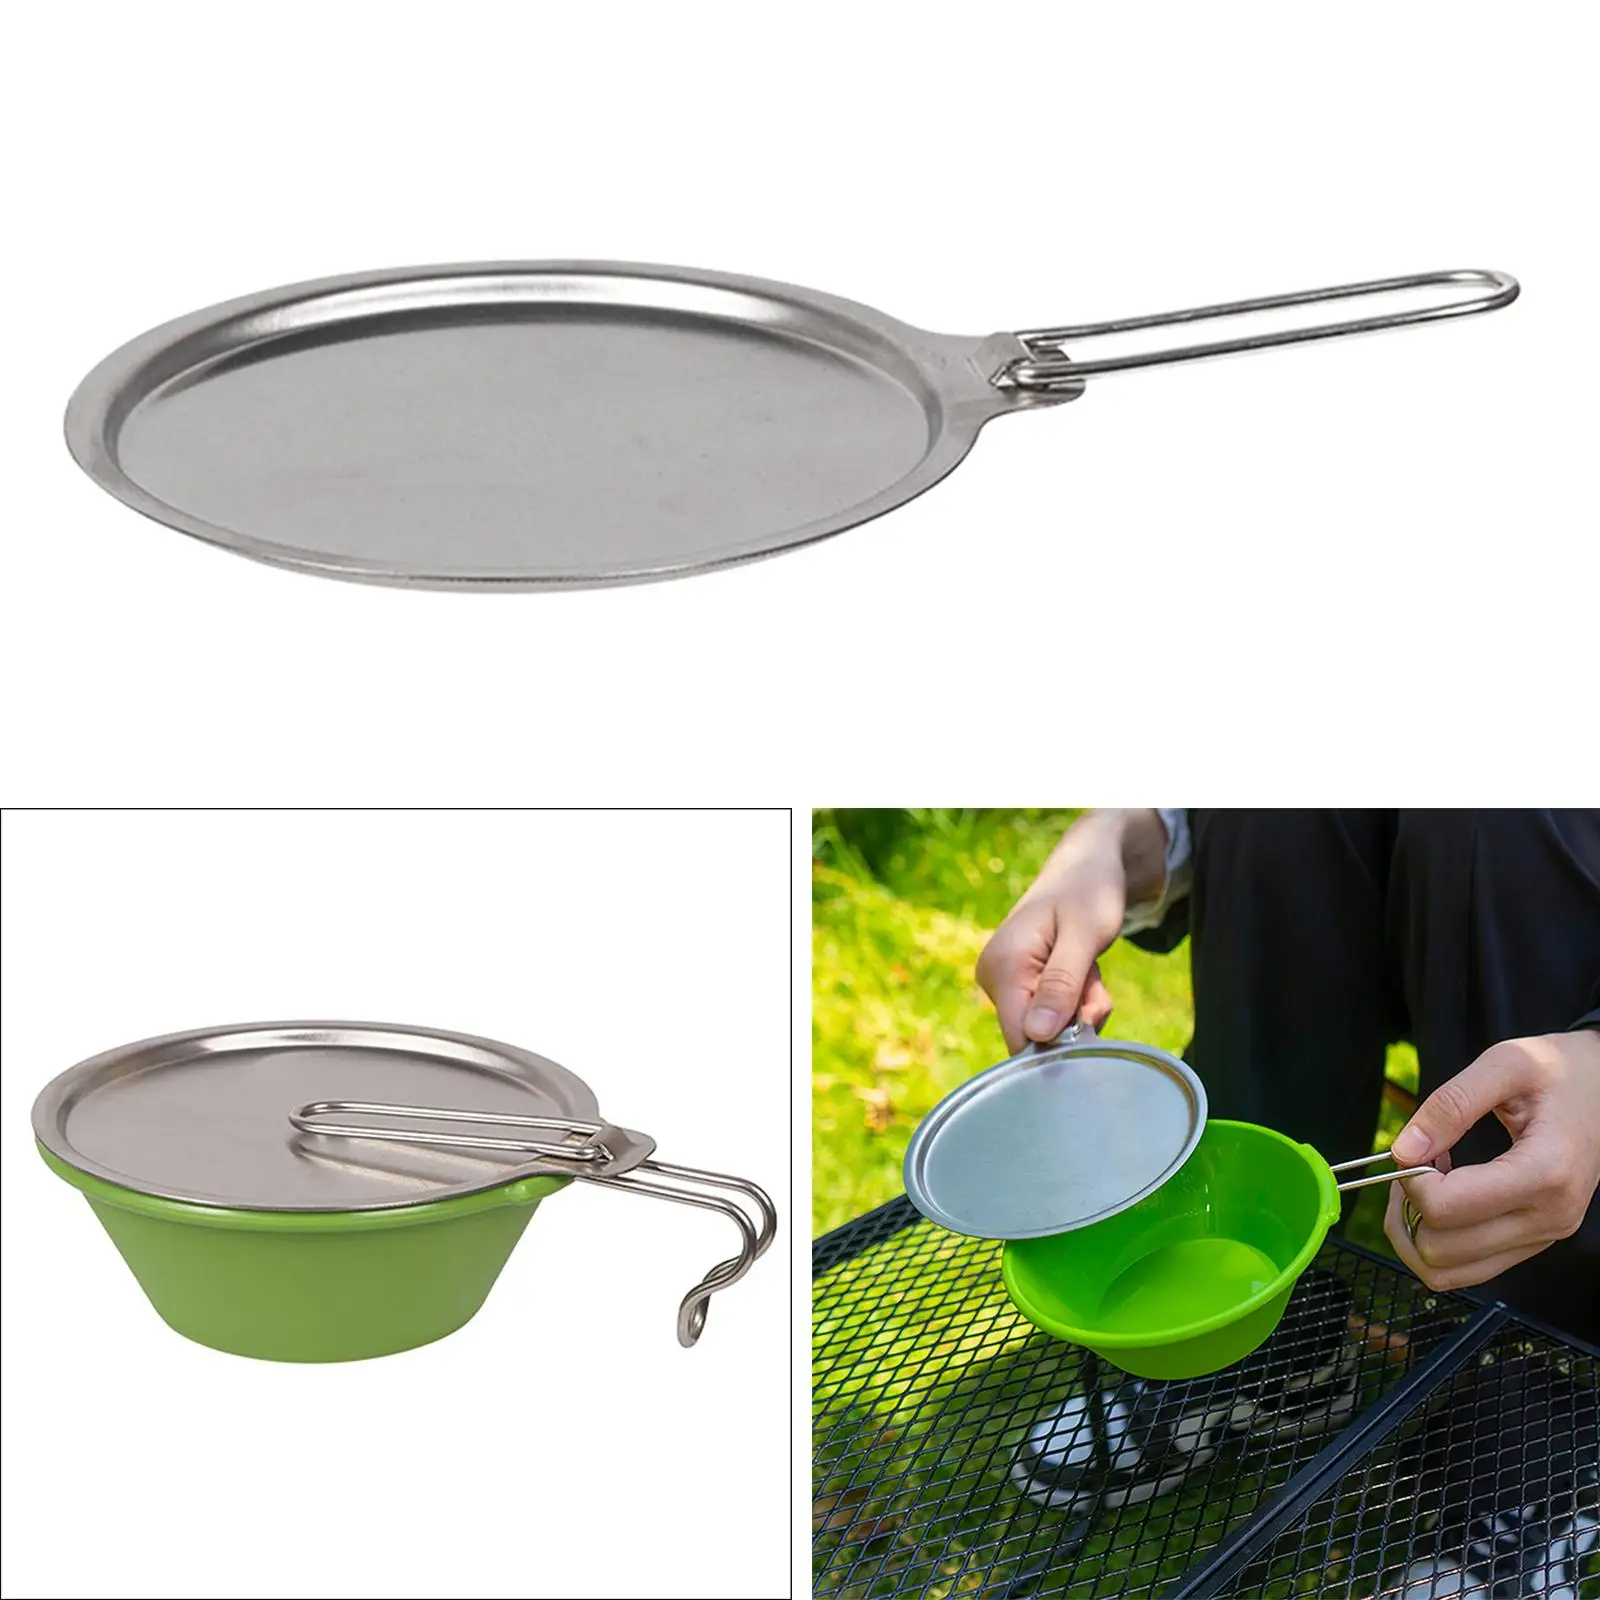 Outdoor Bowl Cover Utensil Recyclable Large with Handle, Camping Bowl Lid Cookware for Travel Beach Barbecue Picnic